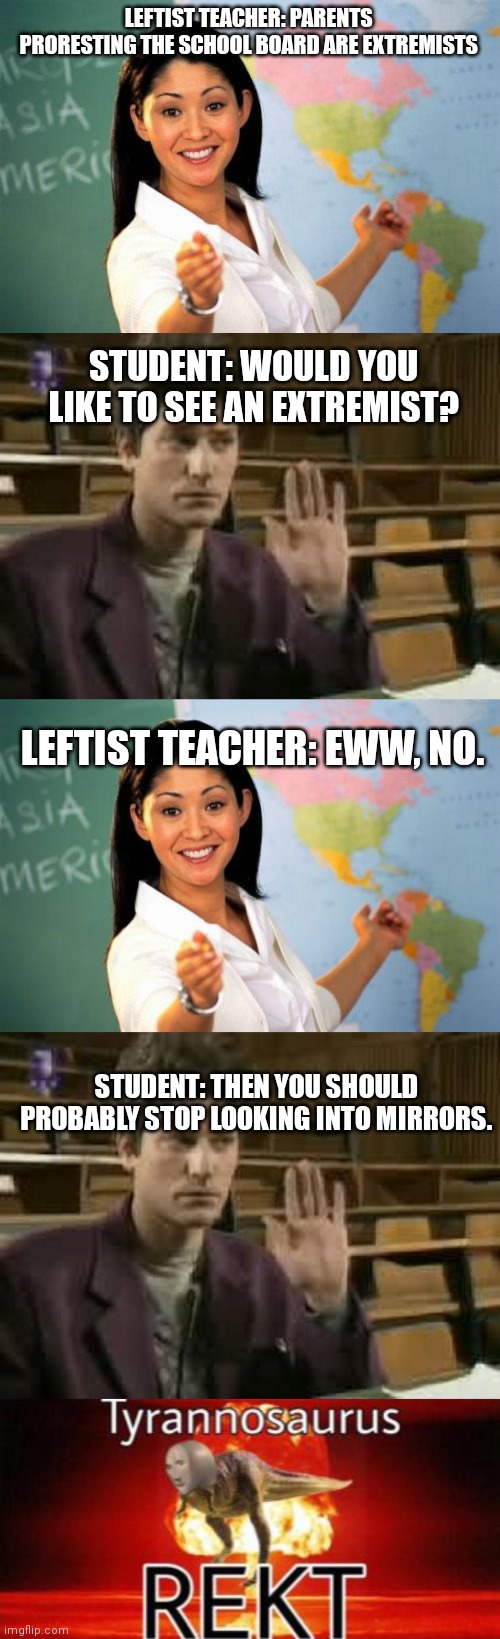 LEFTIST TEACHER: PARENTS PRORESTING THE SCHOOL BOARD ARE EXTREMISTS; STUDENT: WOULD YOU LIKE TO SEE AN EXTREMIST? LEFTIST TEACHER: EWW, NO. STUDENT: THEN YOU SHOULD PROBABLY STOP LOOKING INTO MIRRORS. | image tagged in memes,unhelpful high school teacher,student,tyrannosaurus rekt | made w/ Imgflip meme maker